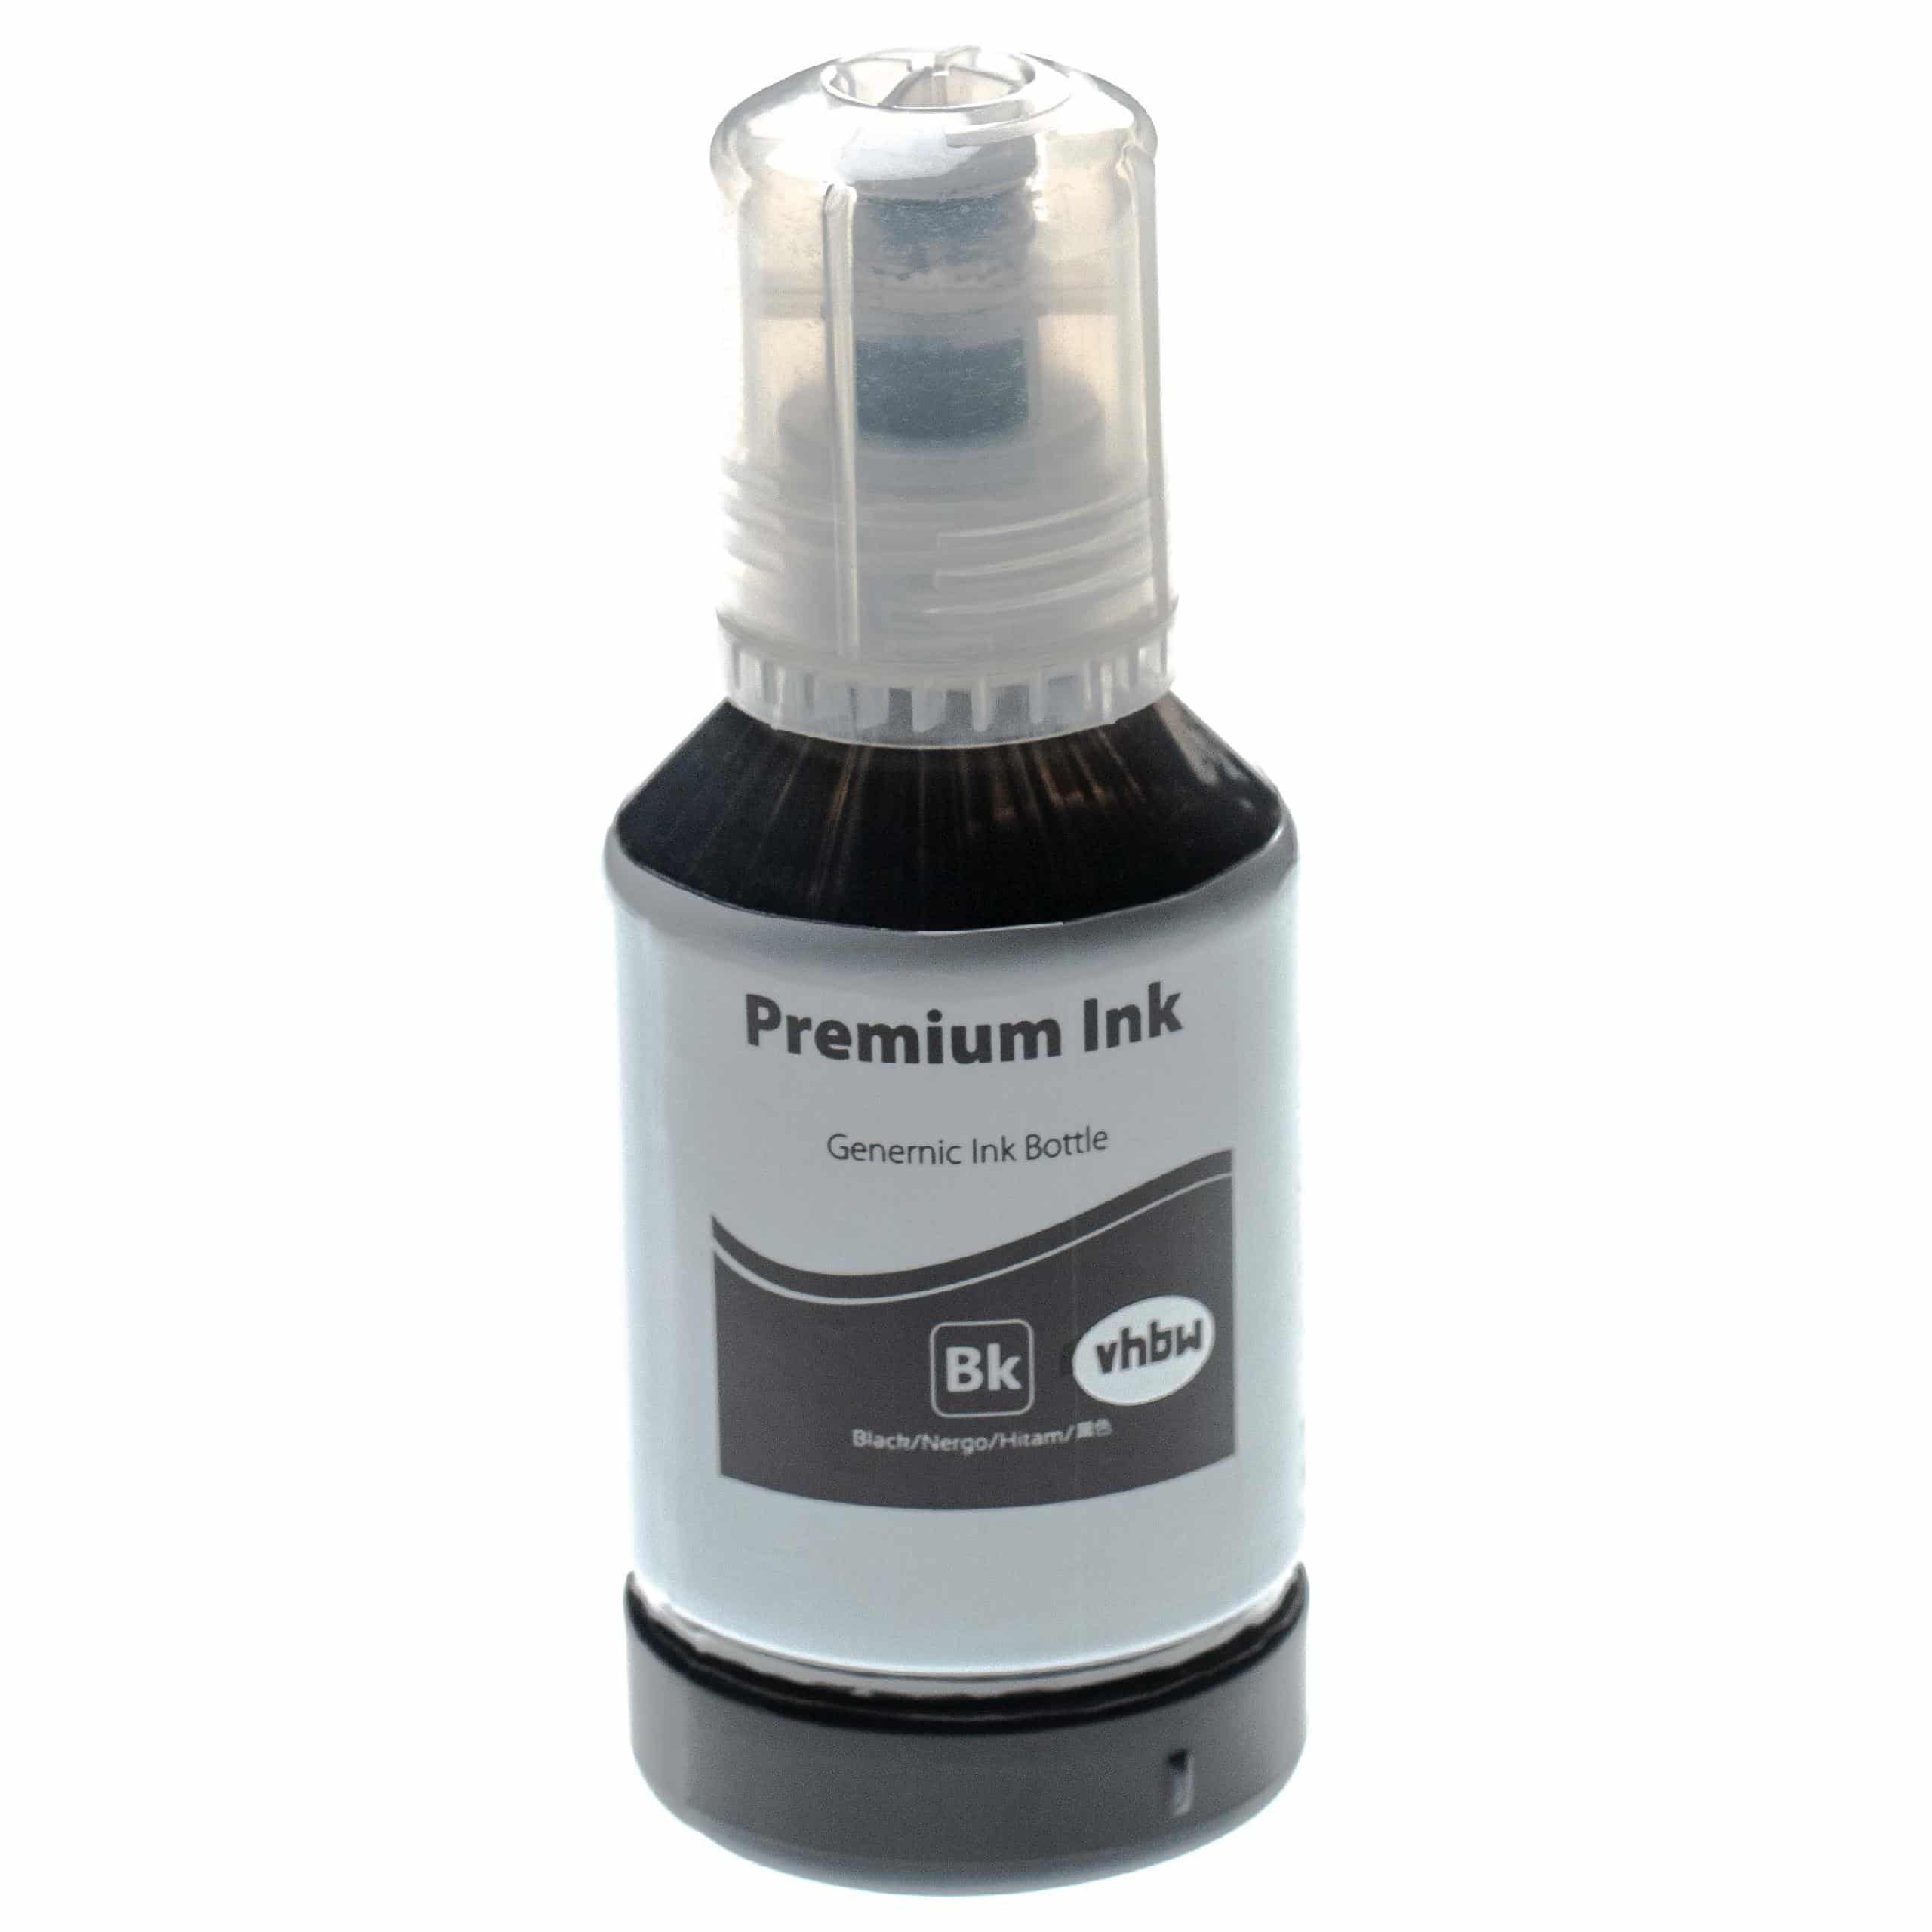 Refill Ink Black Pigmented replaces Epson C13T03R140, 102 black pigment ink for Epson Printers etc 127ml